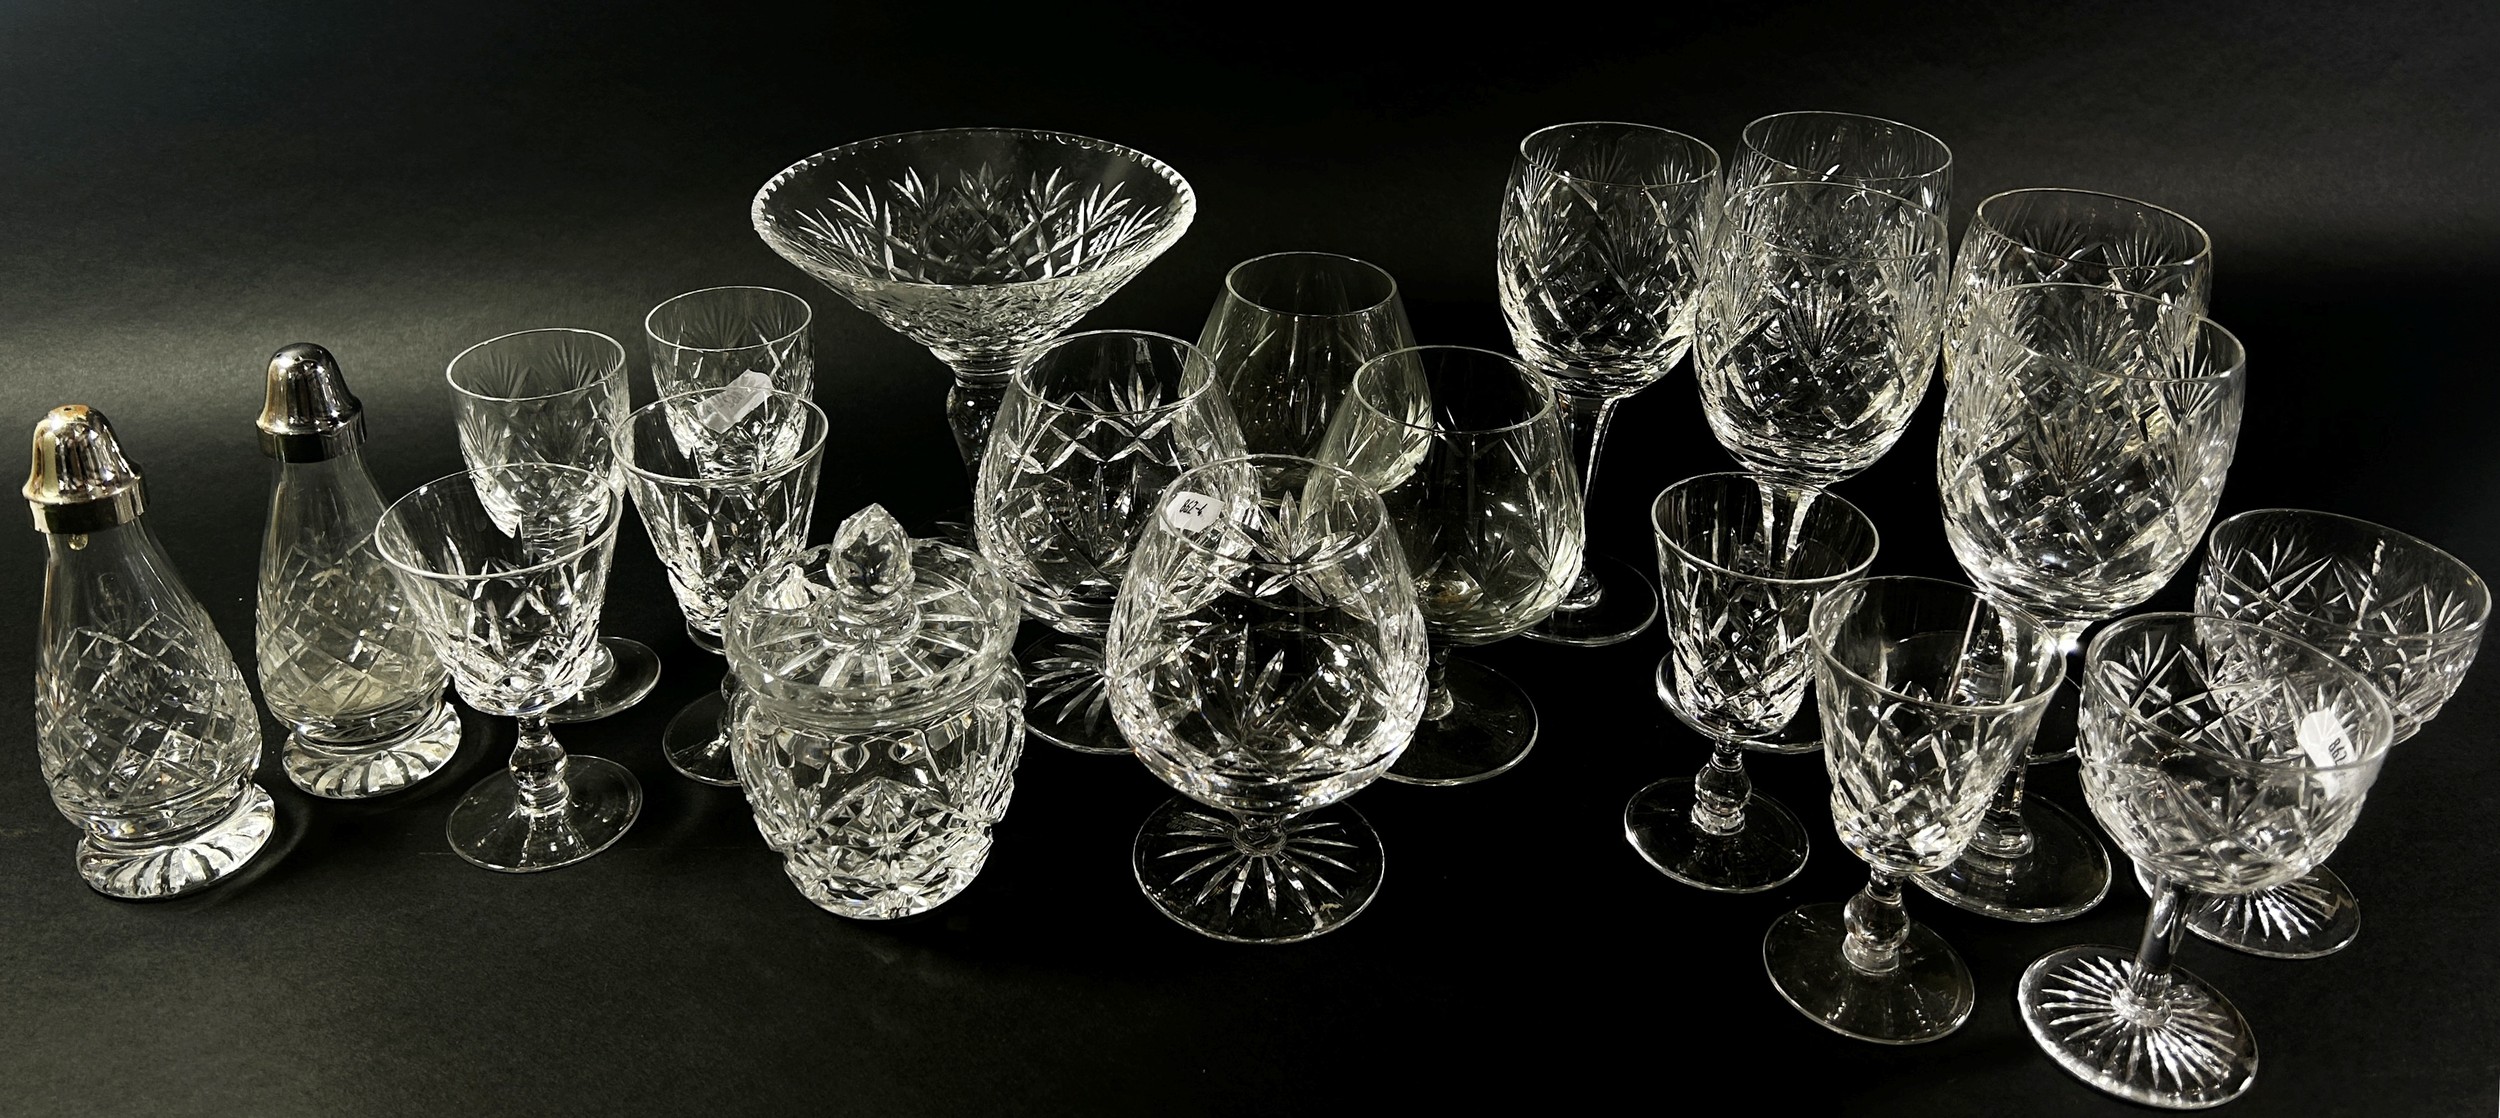 A mixed selection of cut glass including red wine glasses, white wine, brandy balloons, tumblers, - Image 2 of 3